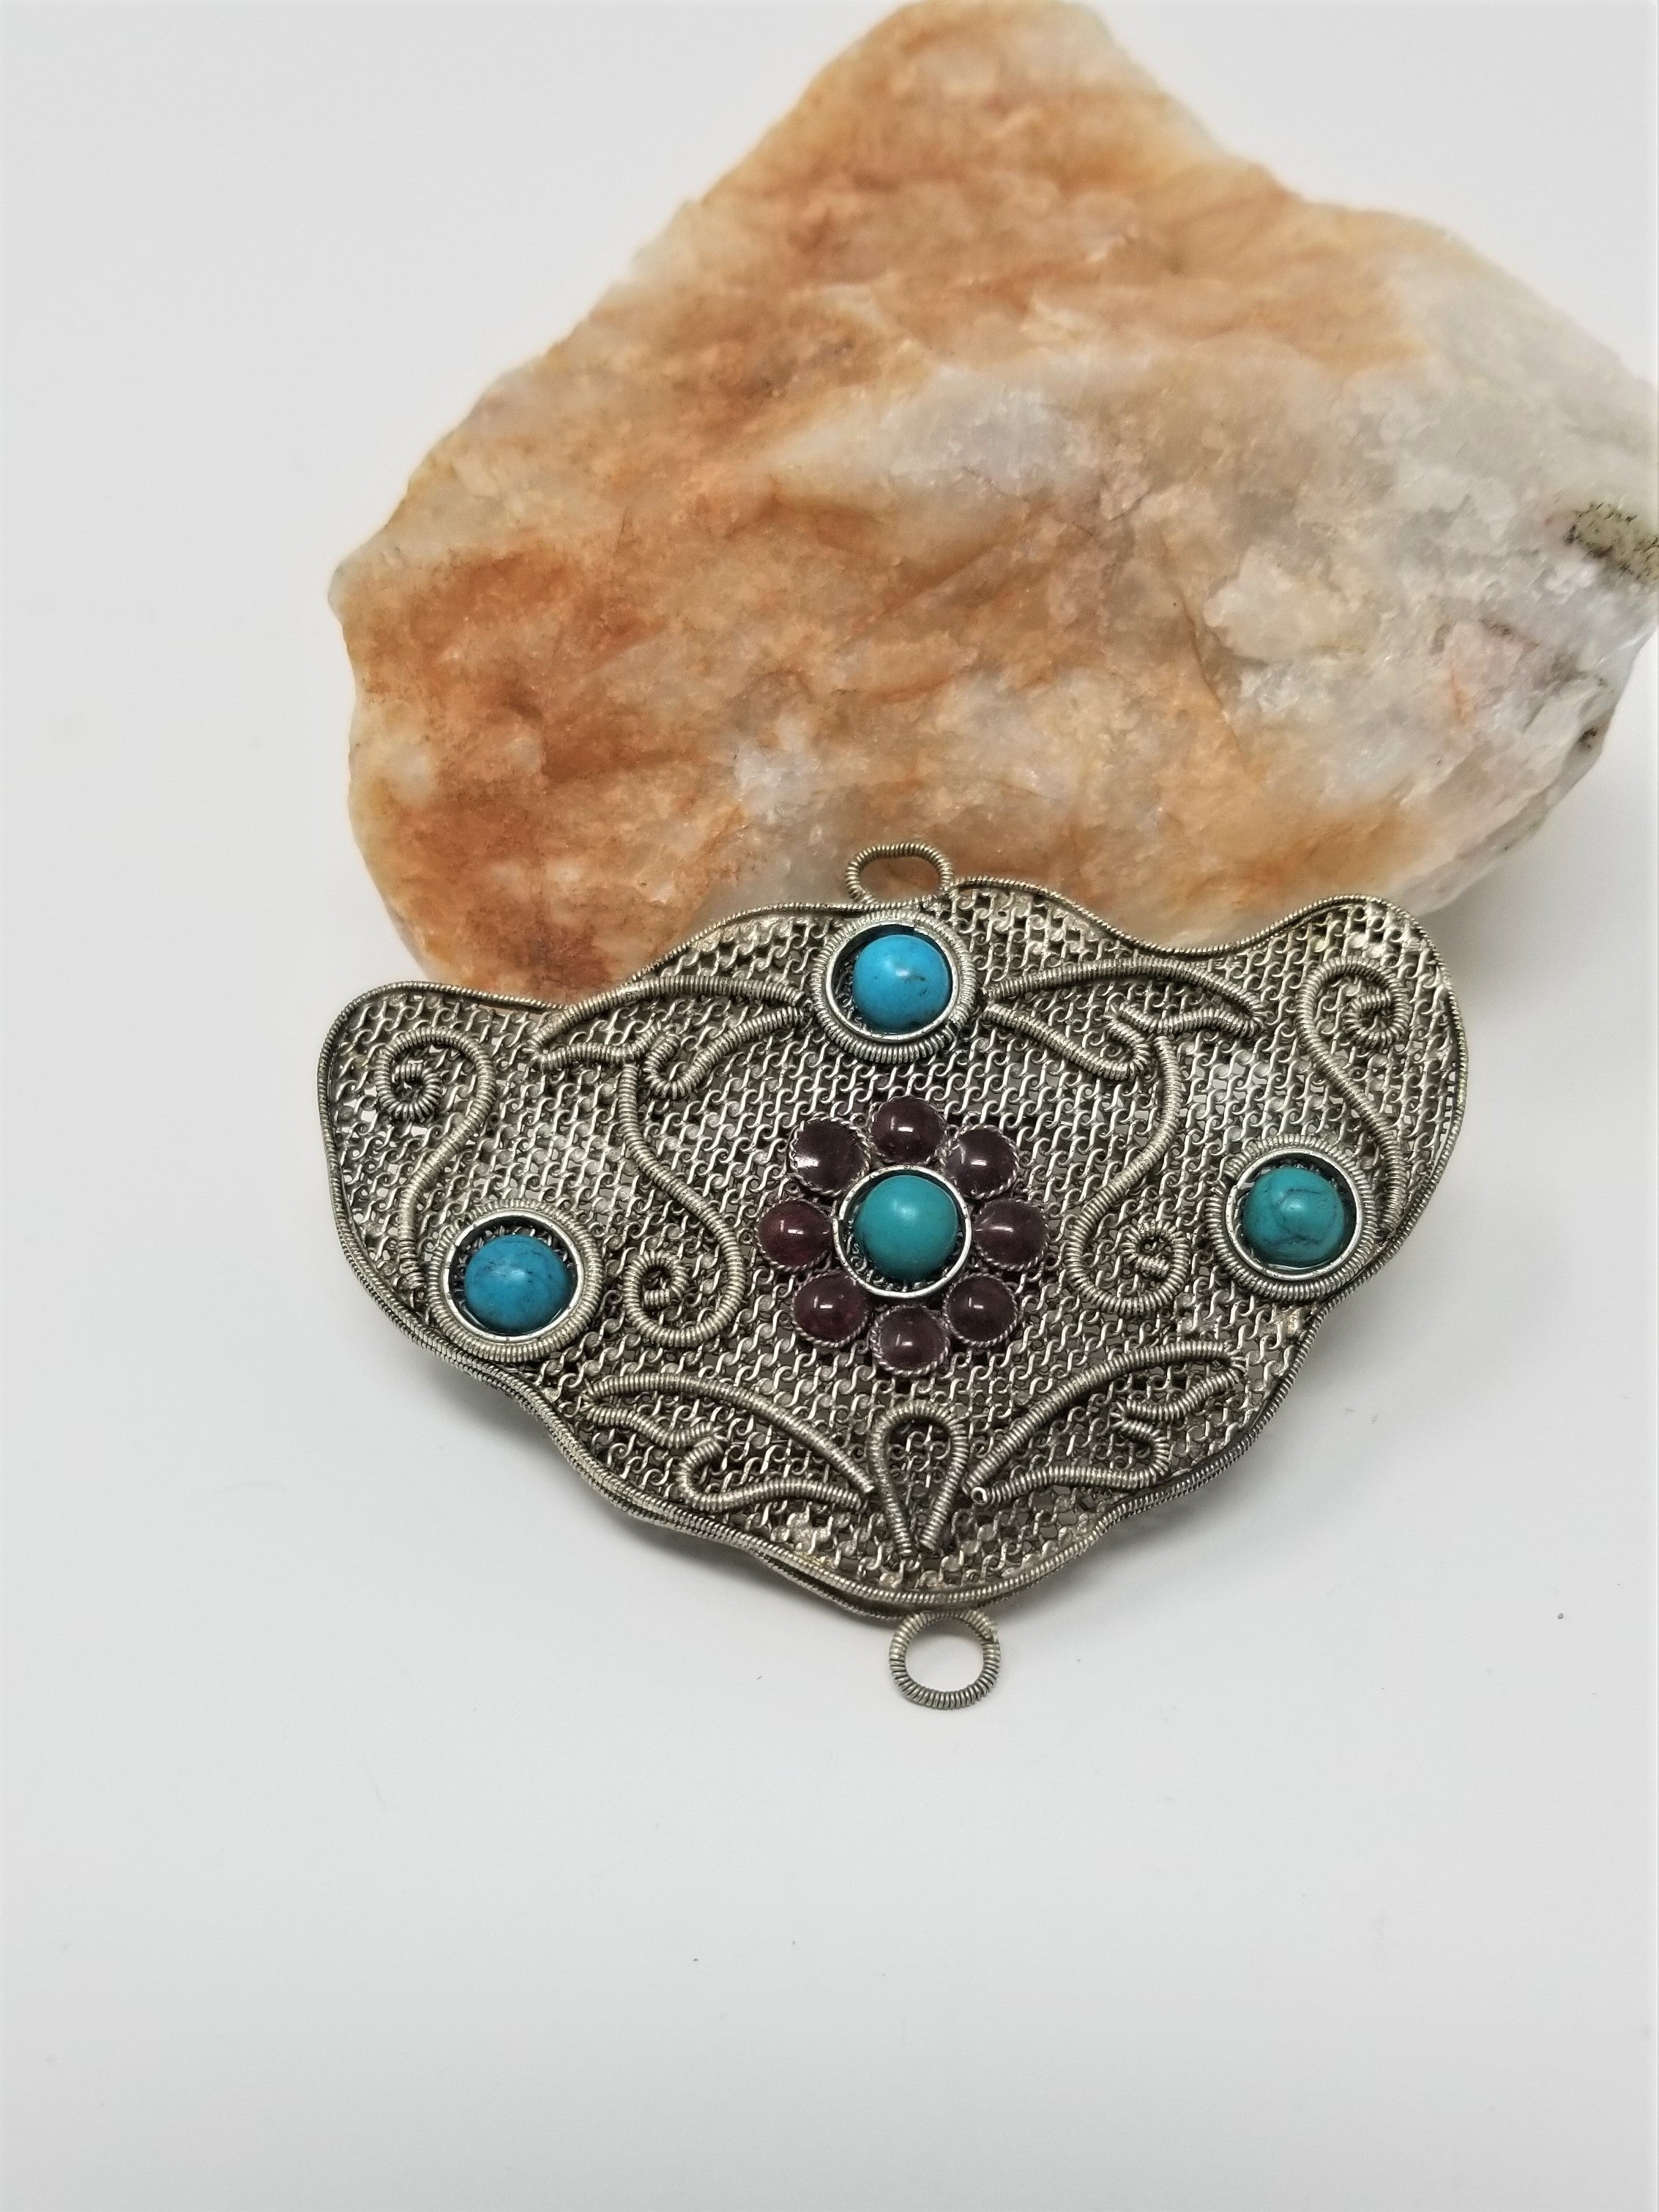 Antique Pendant Mesh Silver with Turquoise and Garnet Awesome